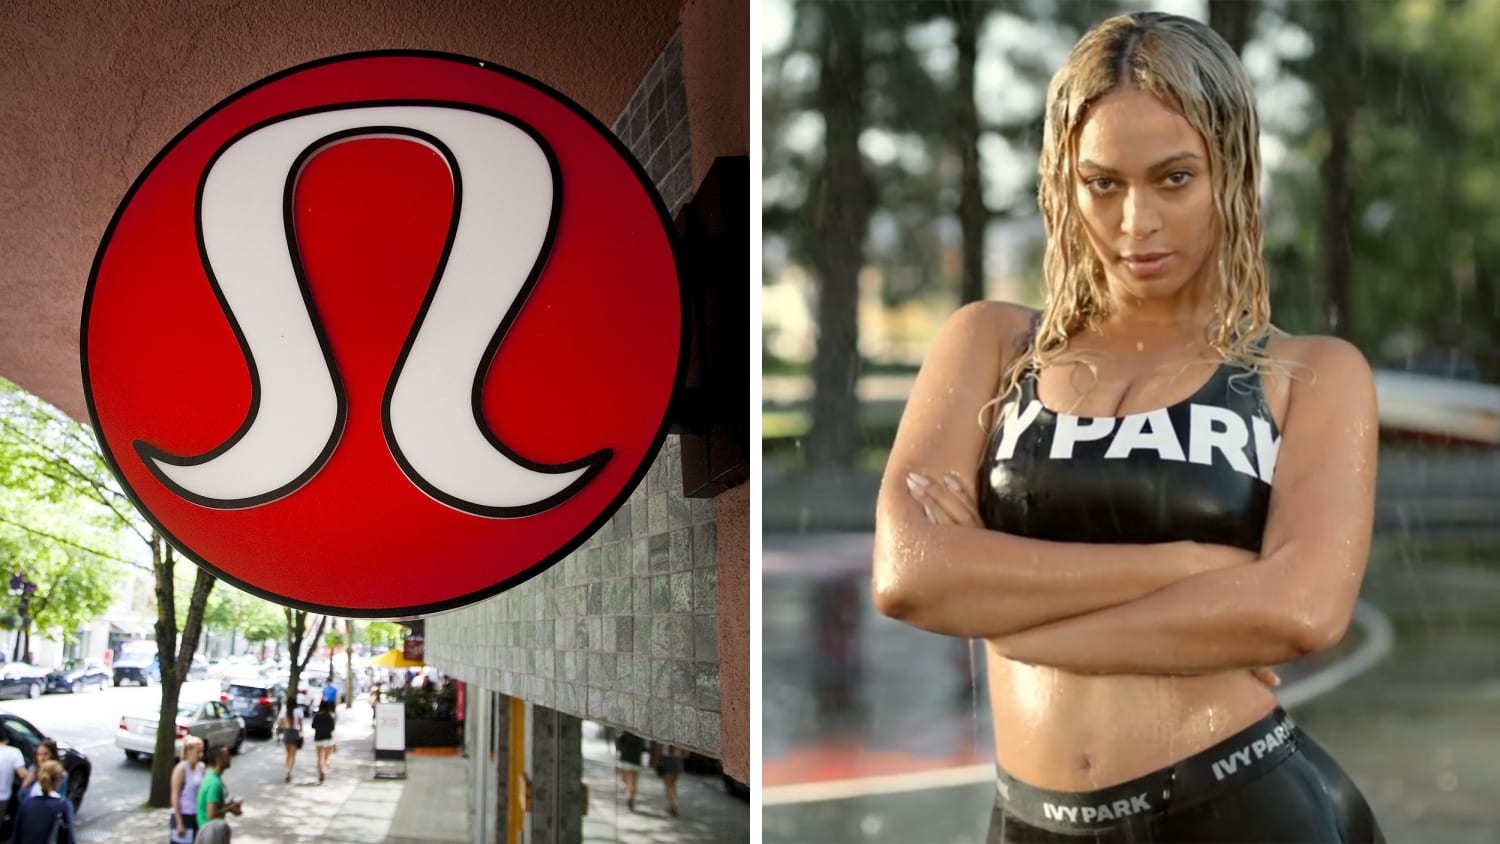 Lululemon accuses Beyonce of imitation with her Ivy Park workout line - TODAY.com2500 x 1407